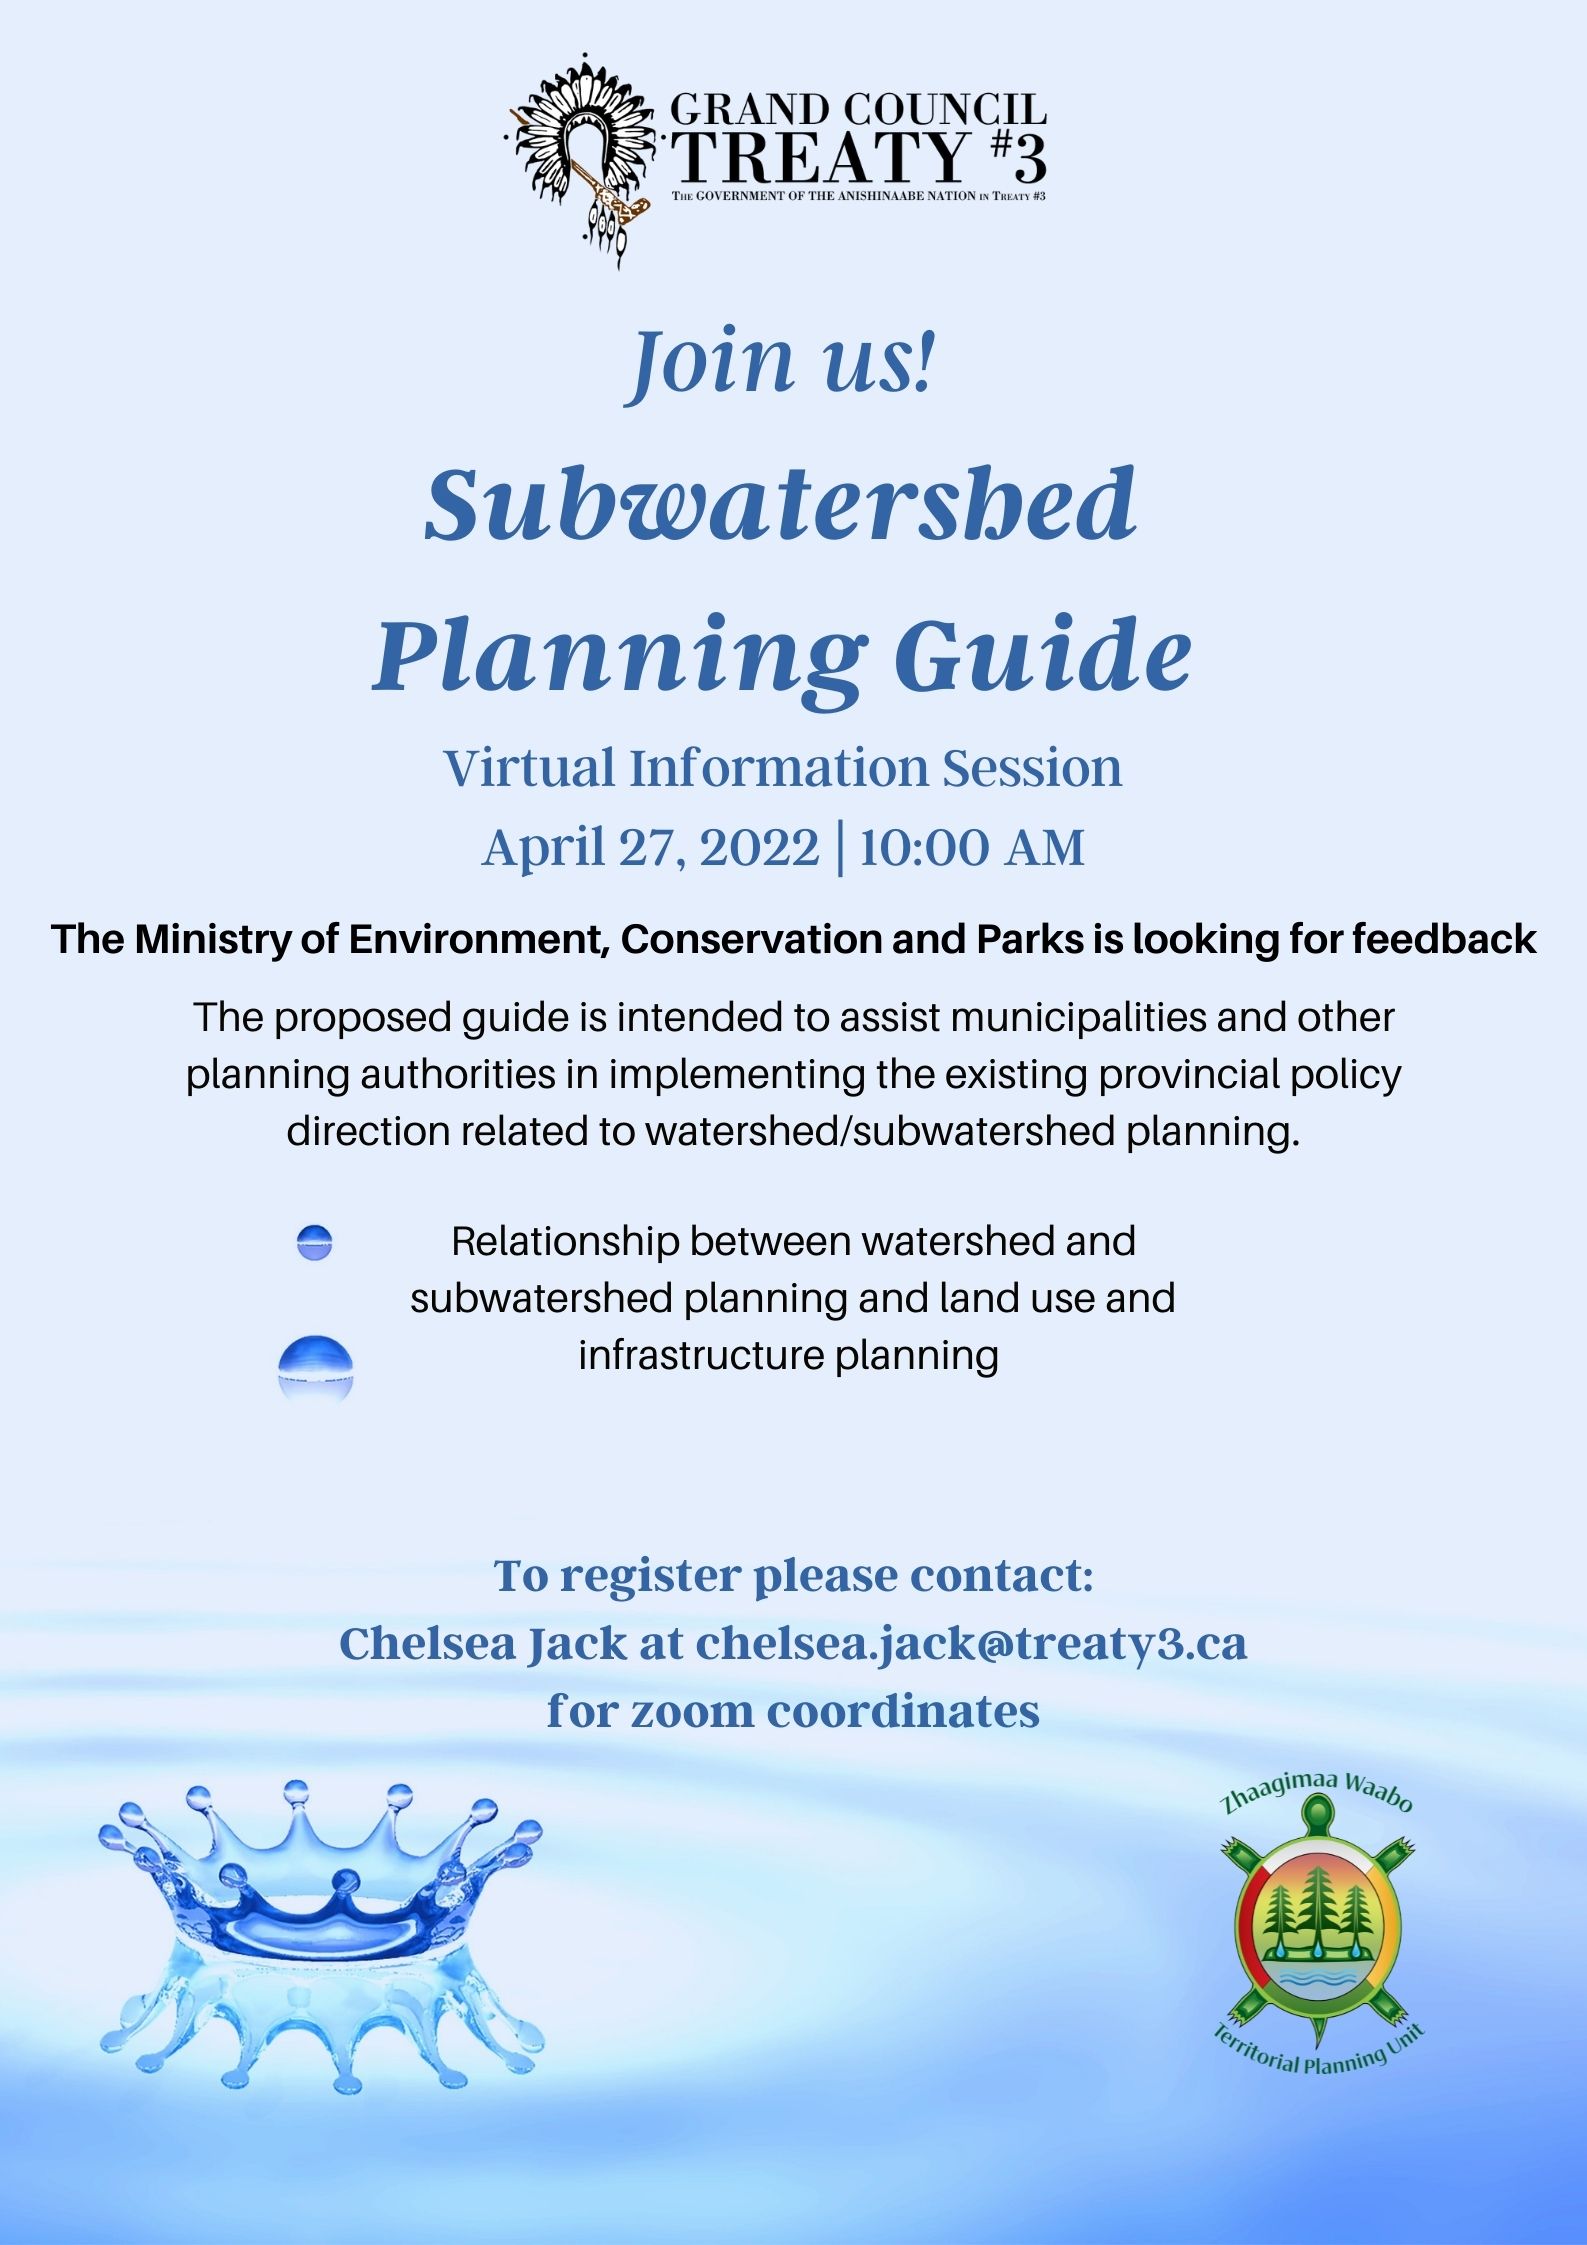 Subwatershed Planning Guide Virtual Information Session